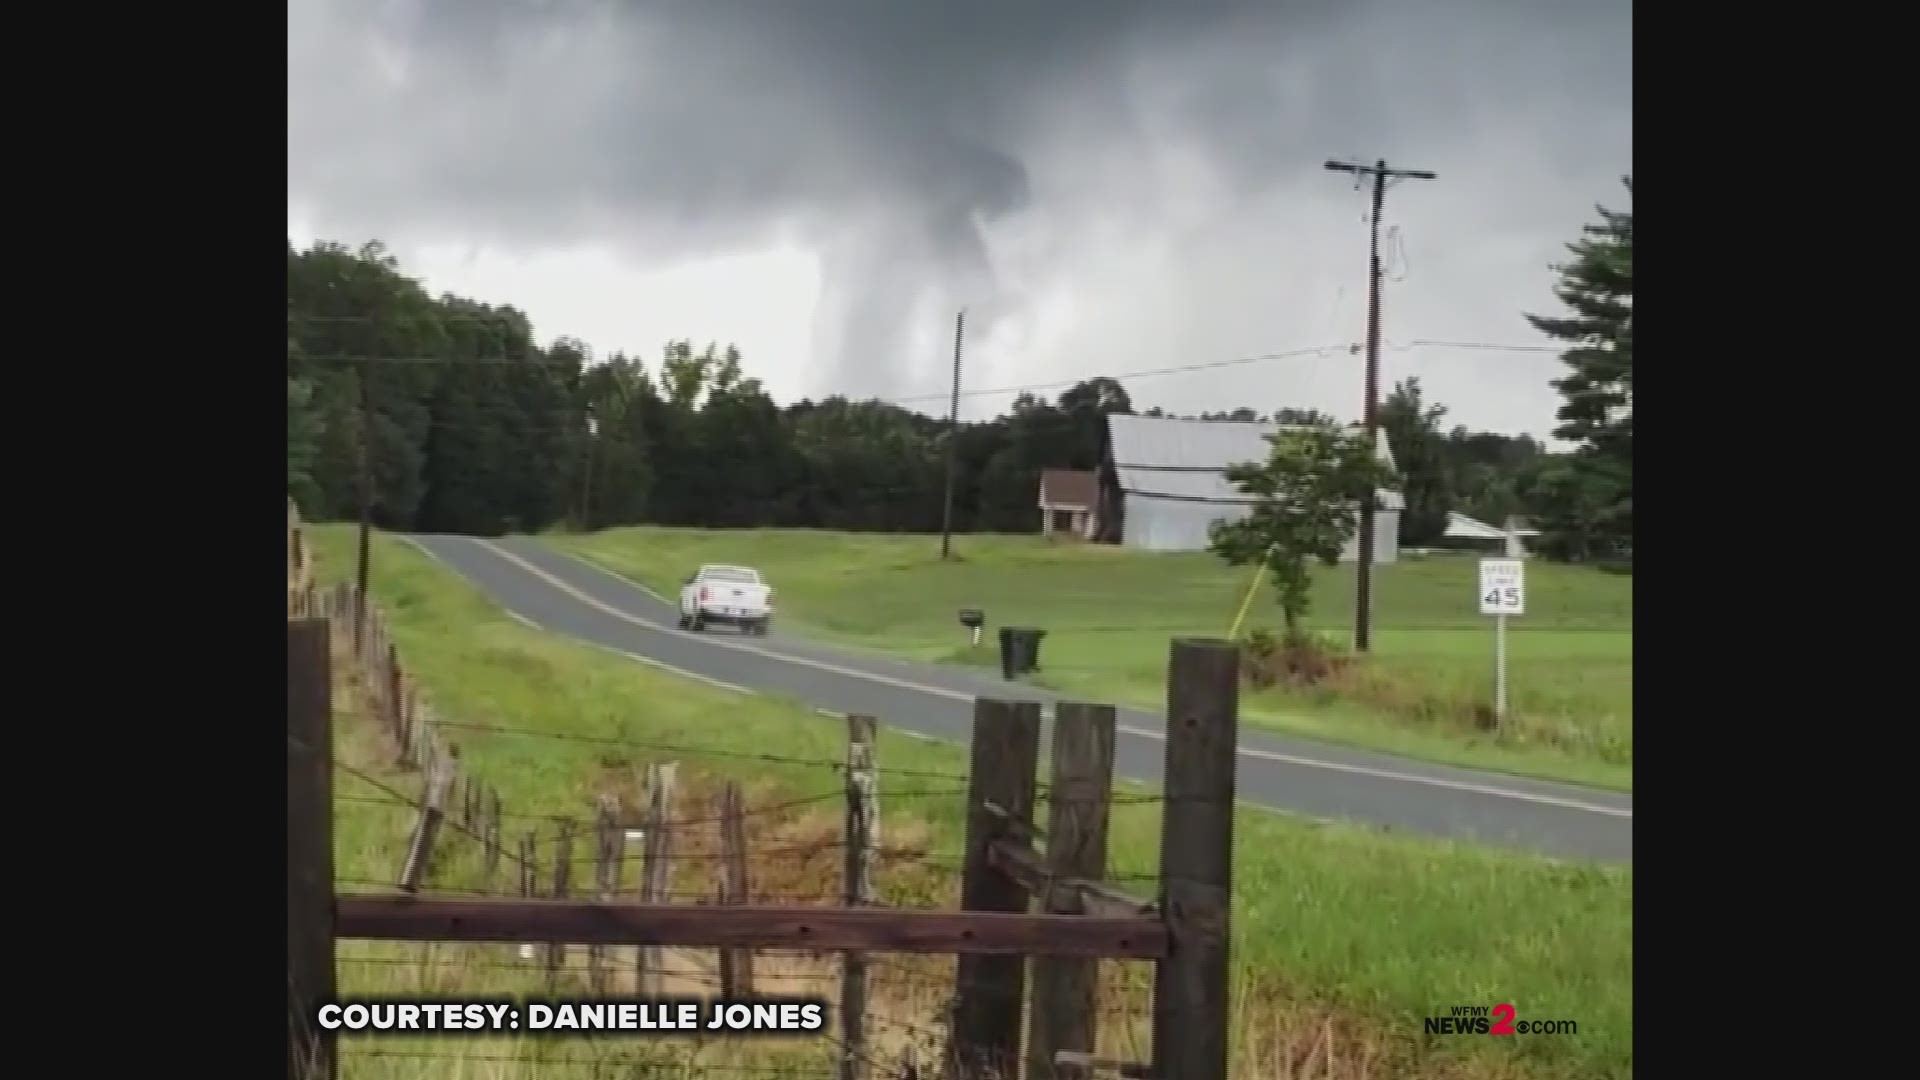 You'll see the cloud spinning very low to the ground. It's hard to tell if it's touching the ground or not. If not touching, it's a funnel cloud. If it is, it's a weak tornado. Video Courtesy: Danielle Jones